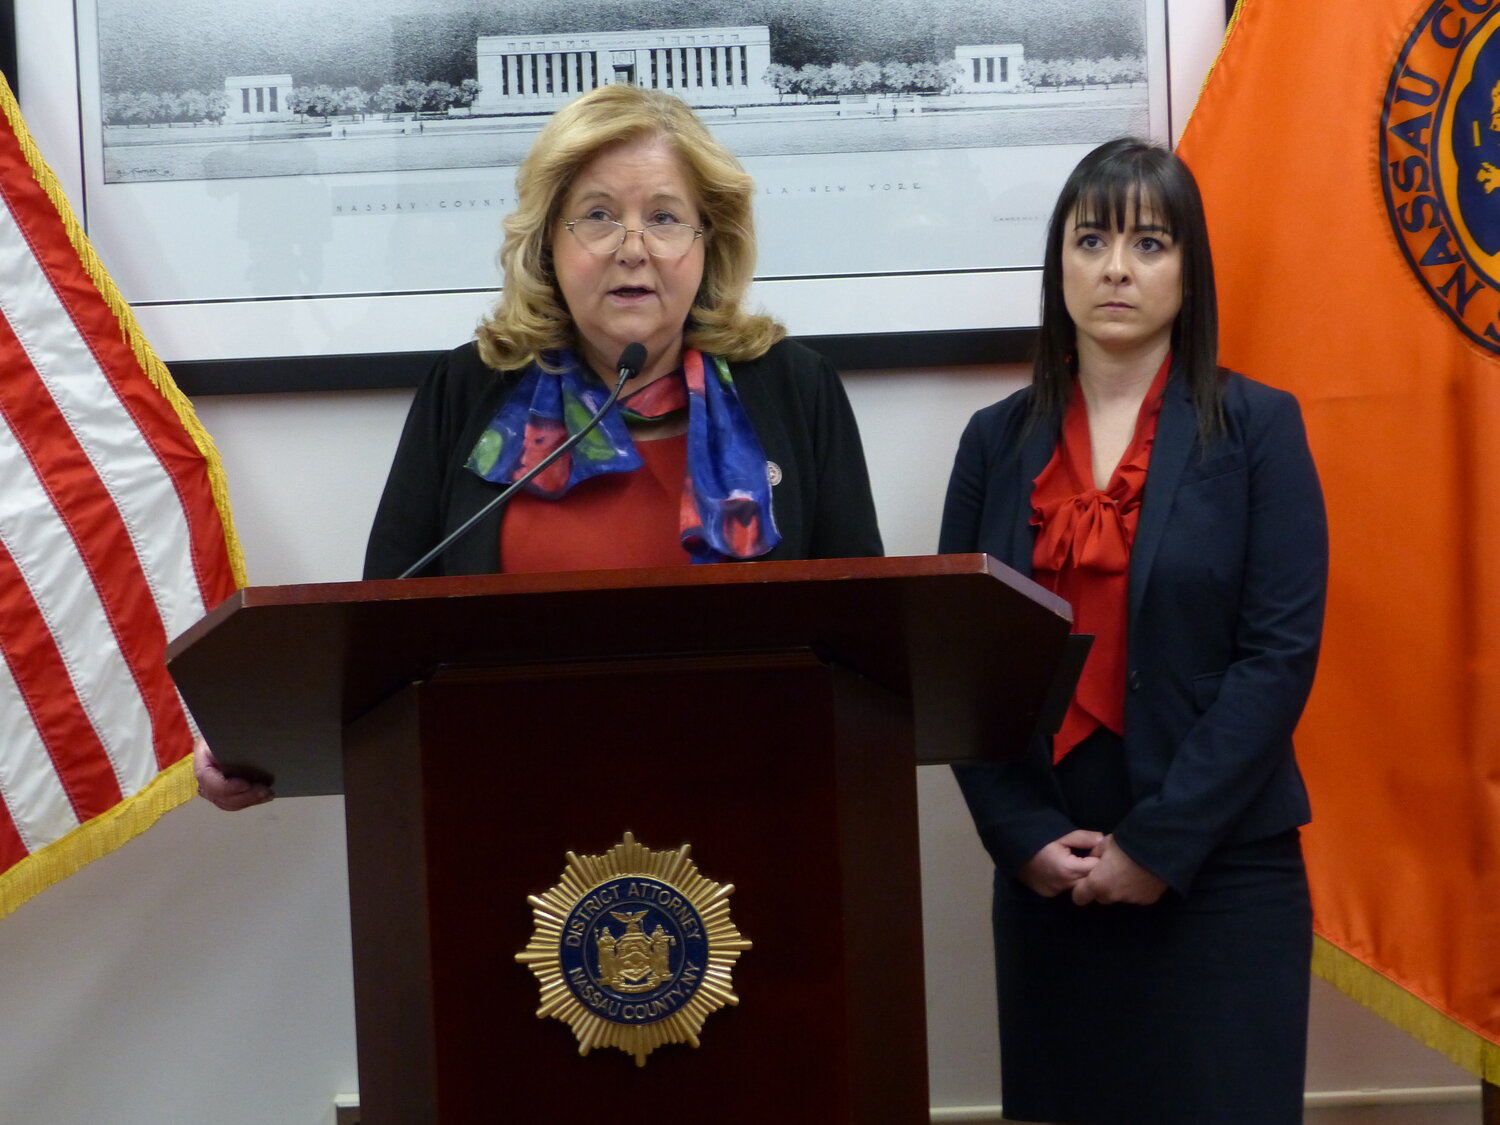 Nassau County District Attorney Anne Donnelly, left, has proposed a law that would make posting fake sexually explicit images a state crime. This comes after Patrick Carey, of Seaford, nearly got away with doing just that — until he allegedly posted an image of an underage girl.